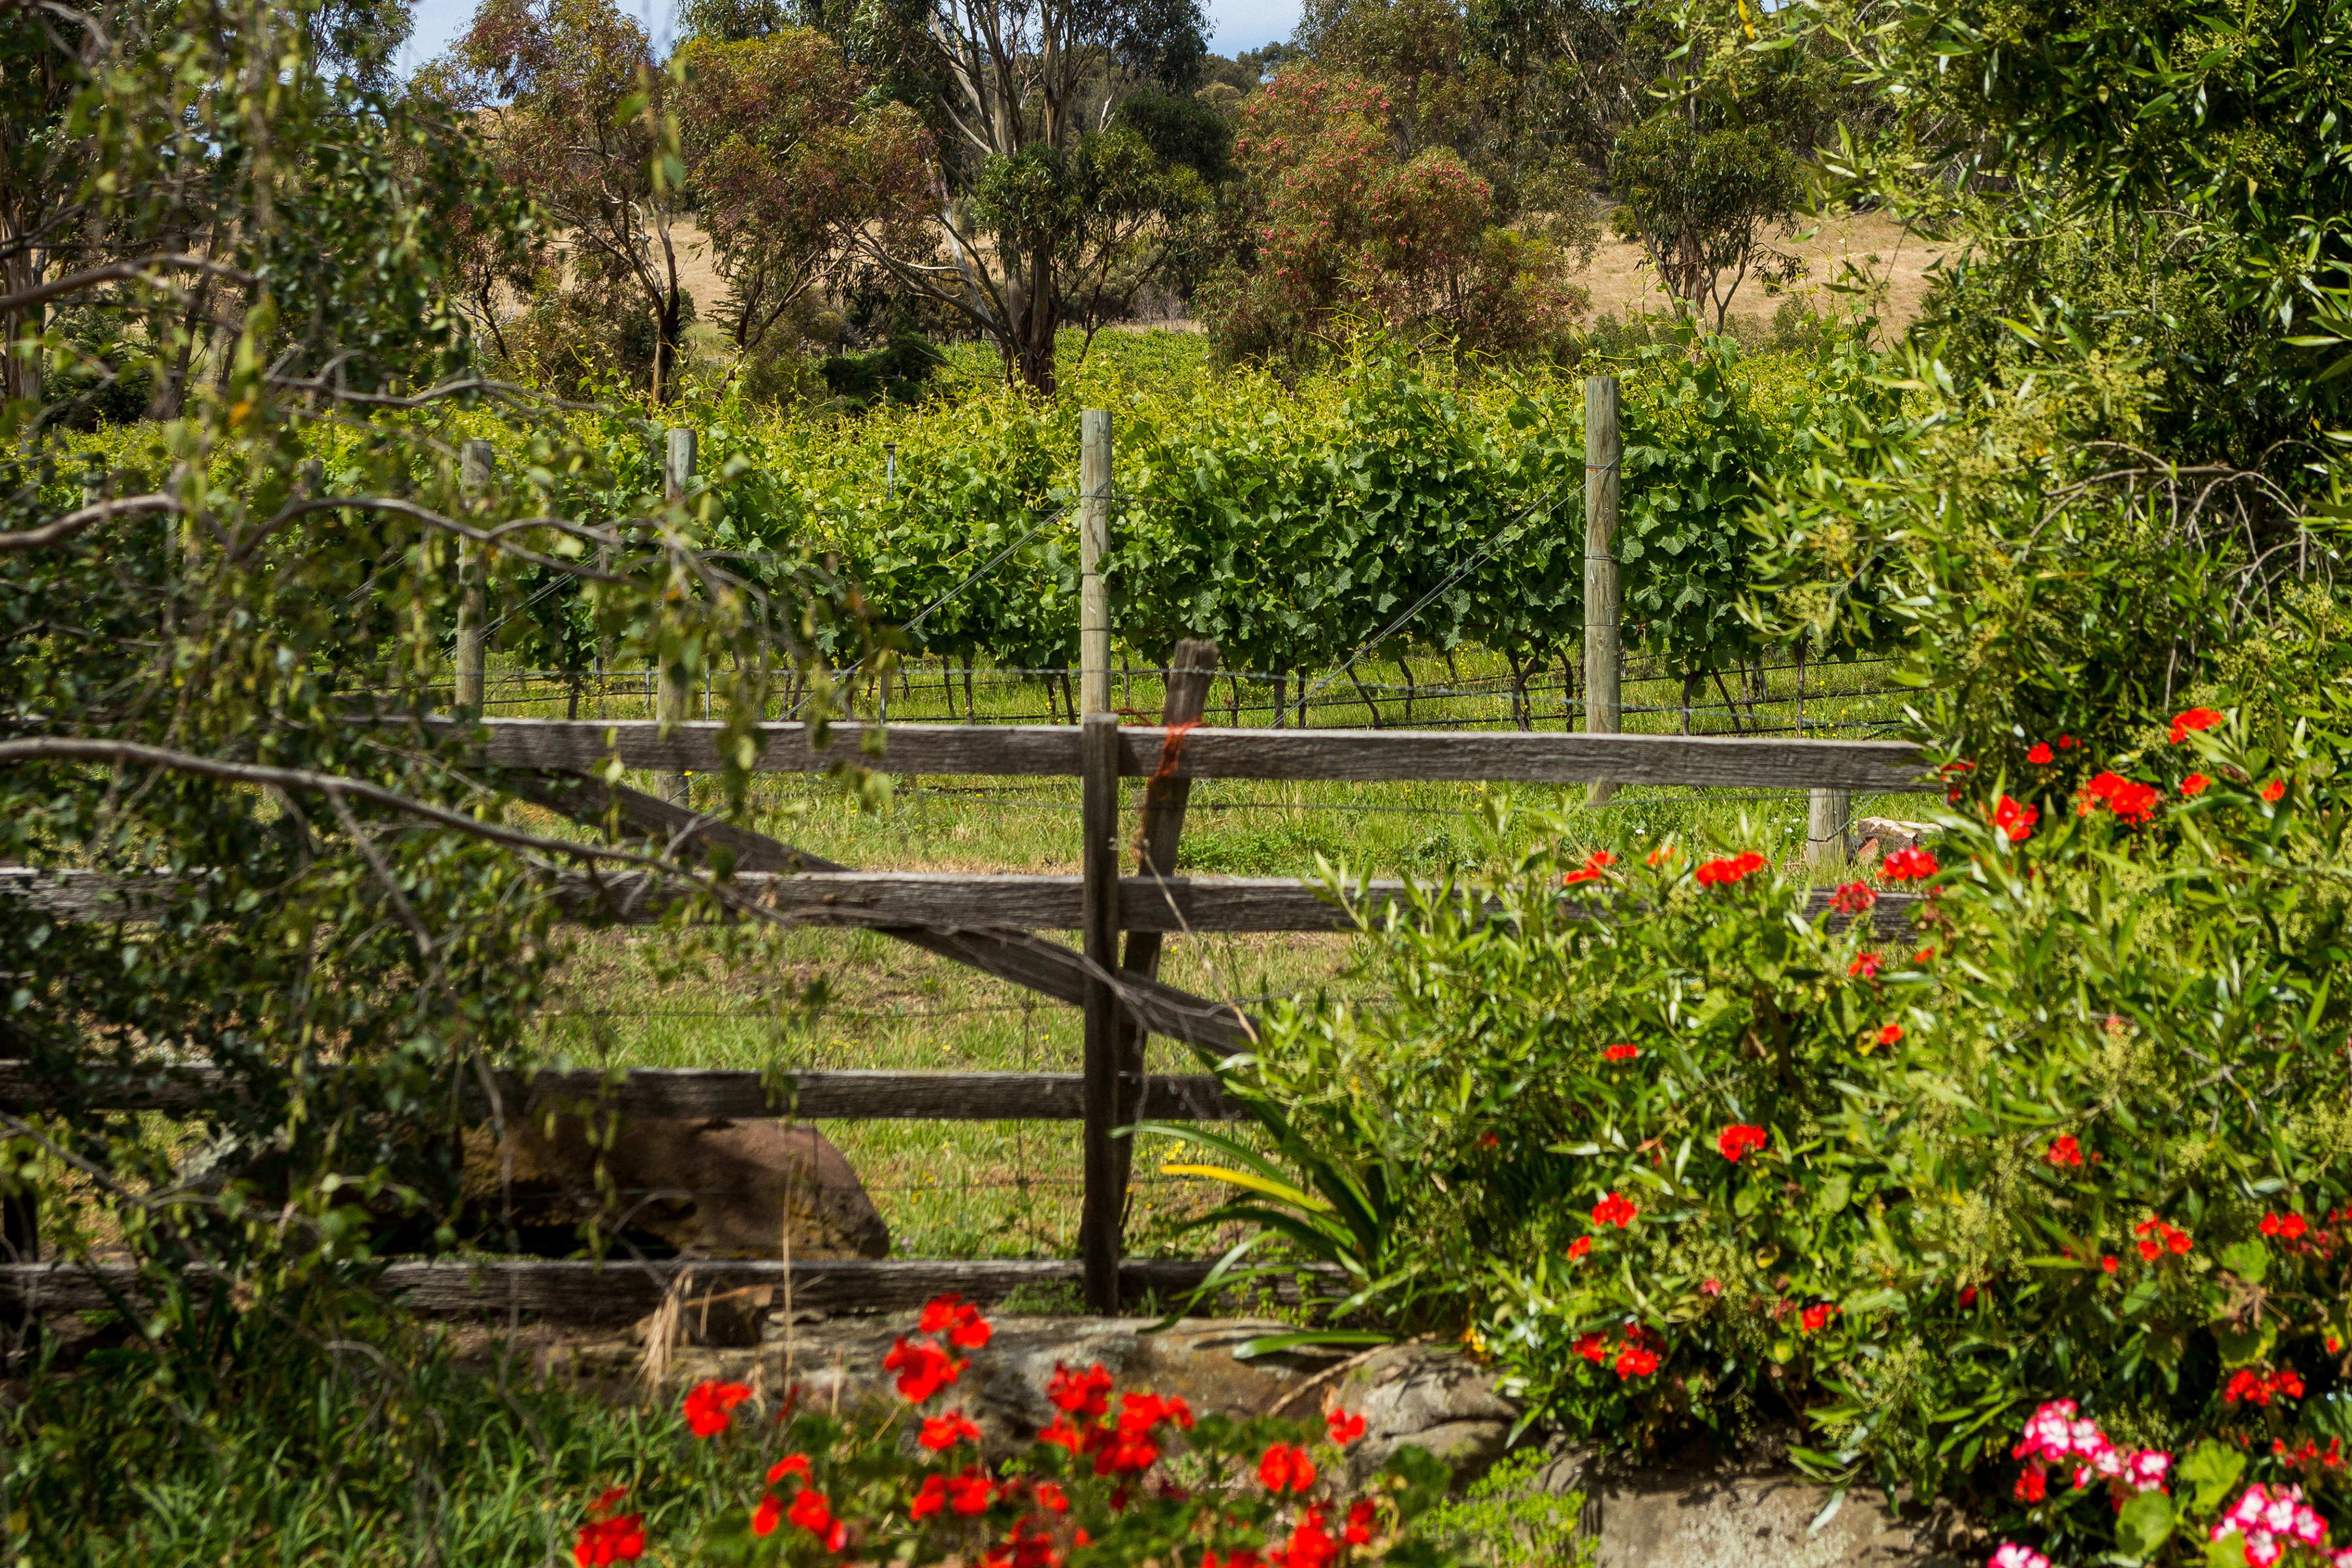 View of the Belmont Vineyard at Pooley Wines. In the foreground are red geraniums growing along a fenceline.